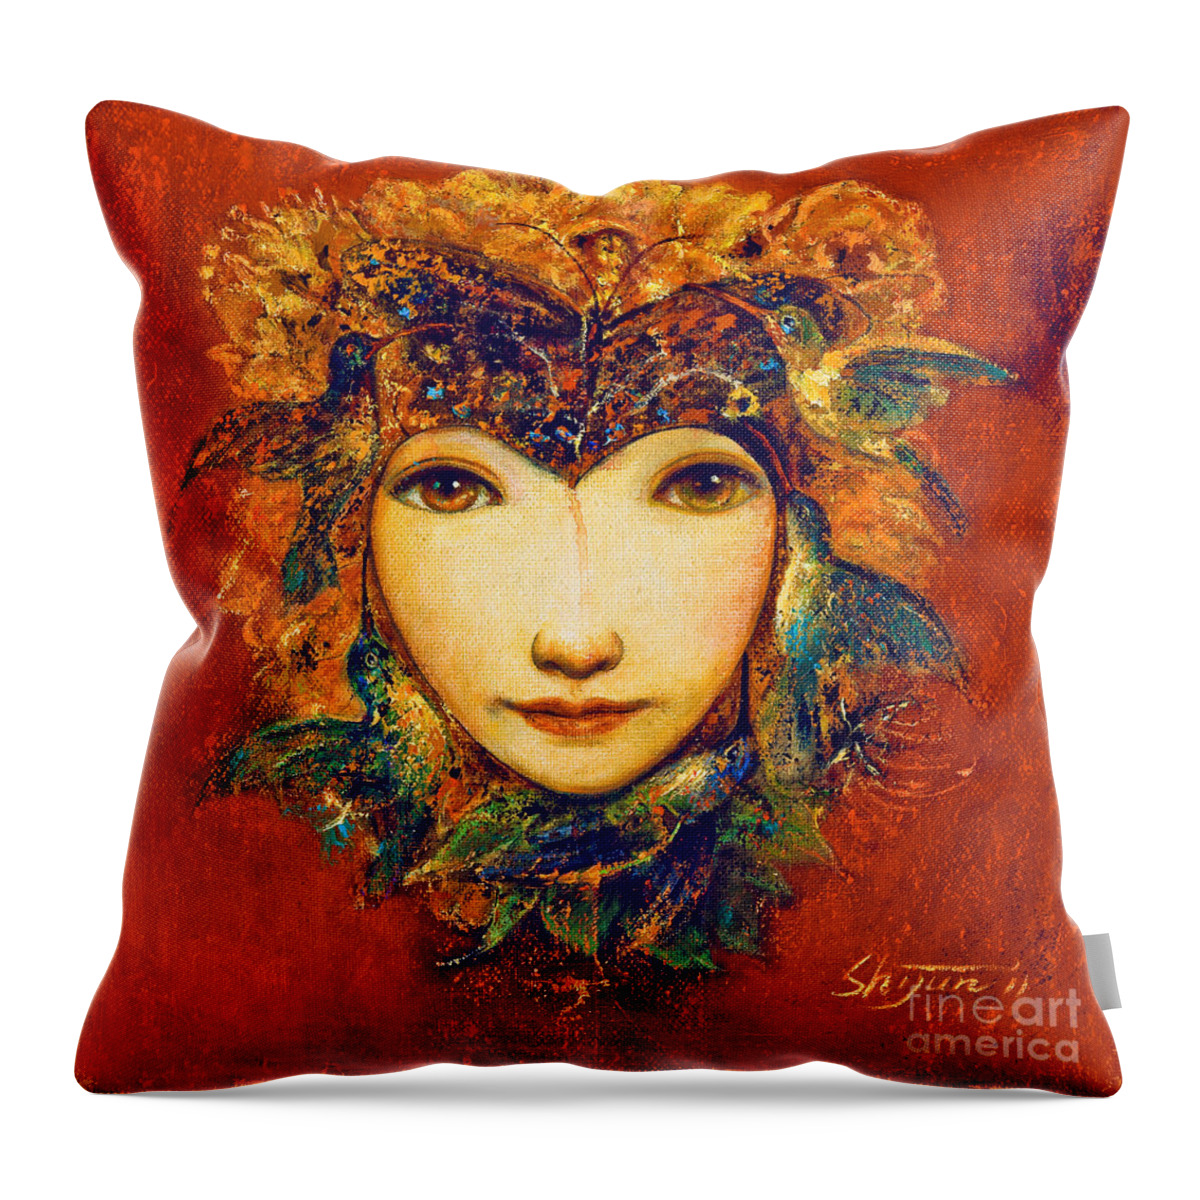 Spring Artwork Throw Pillow featuring the painting Spring II by Shijun Munns